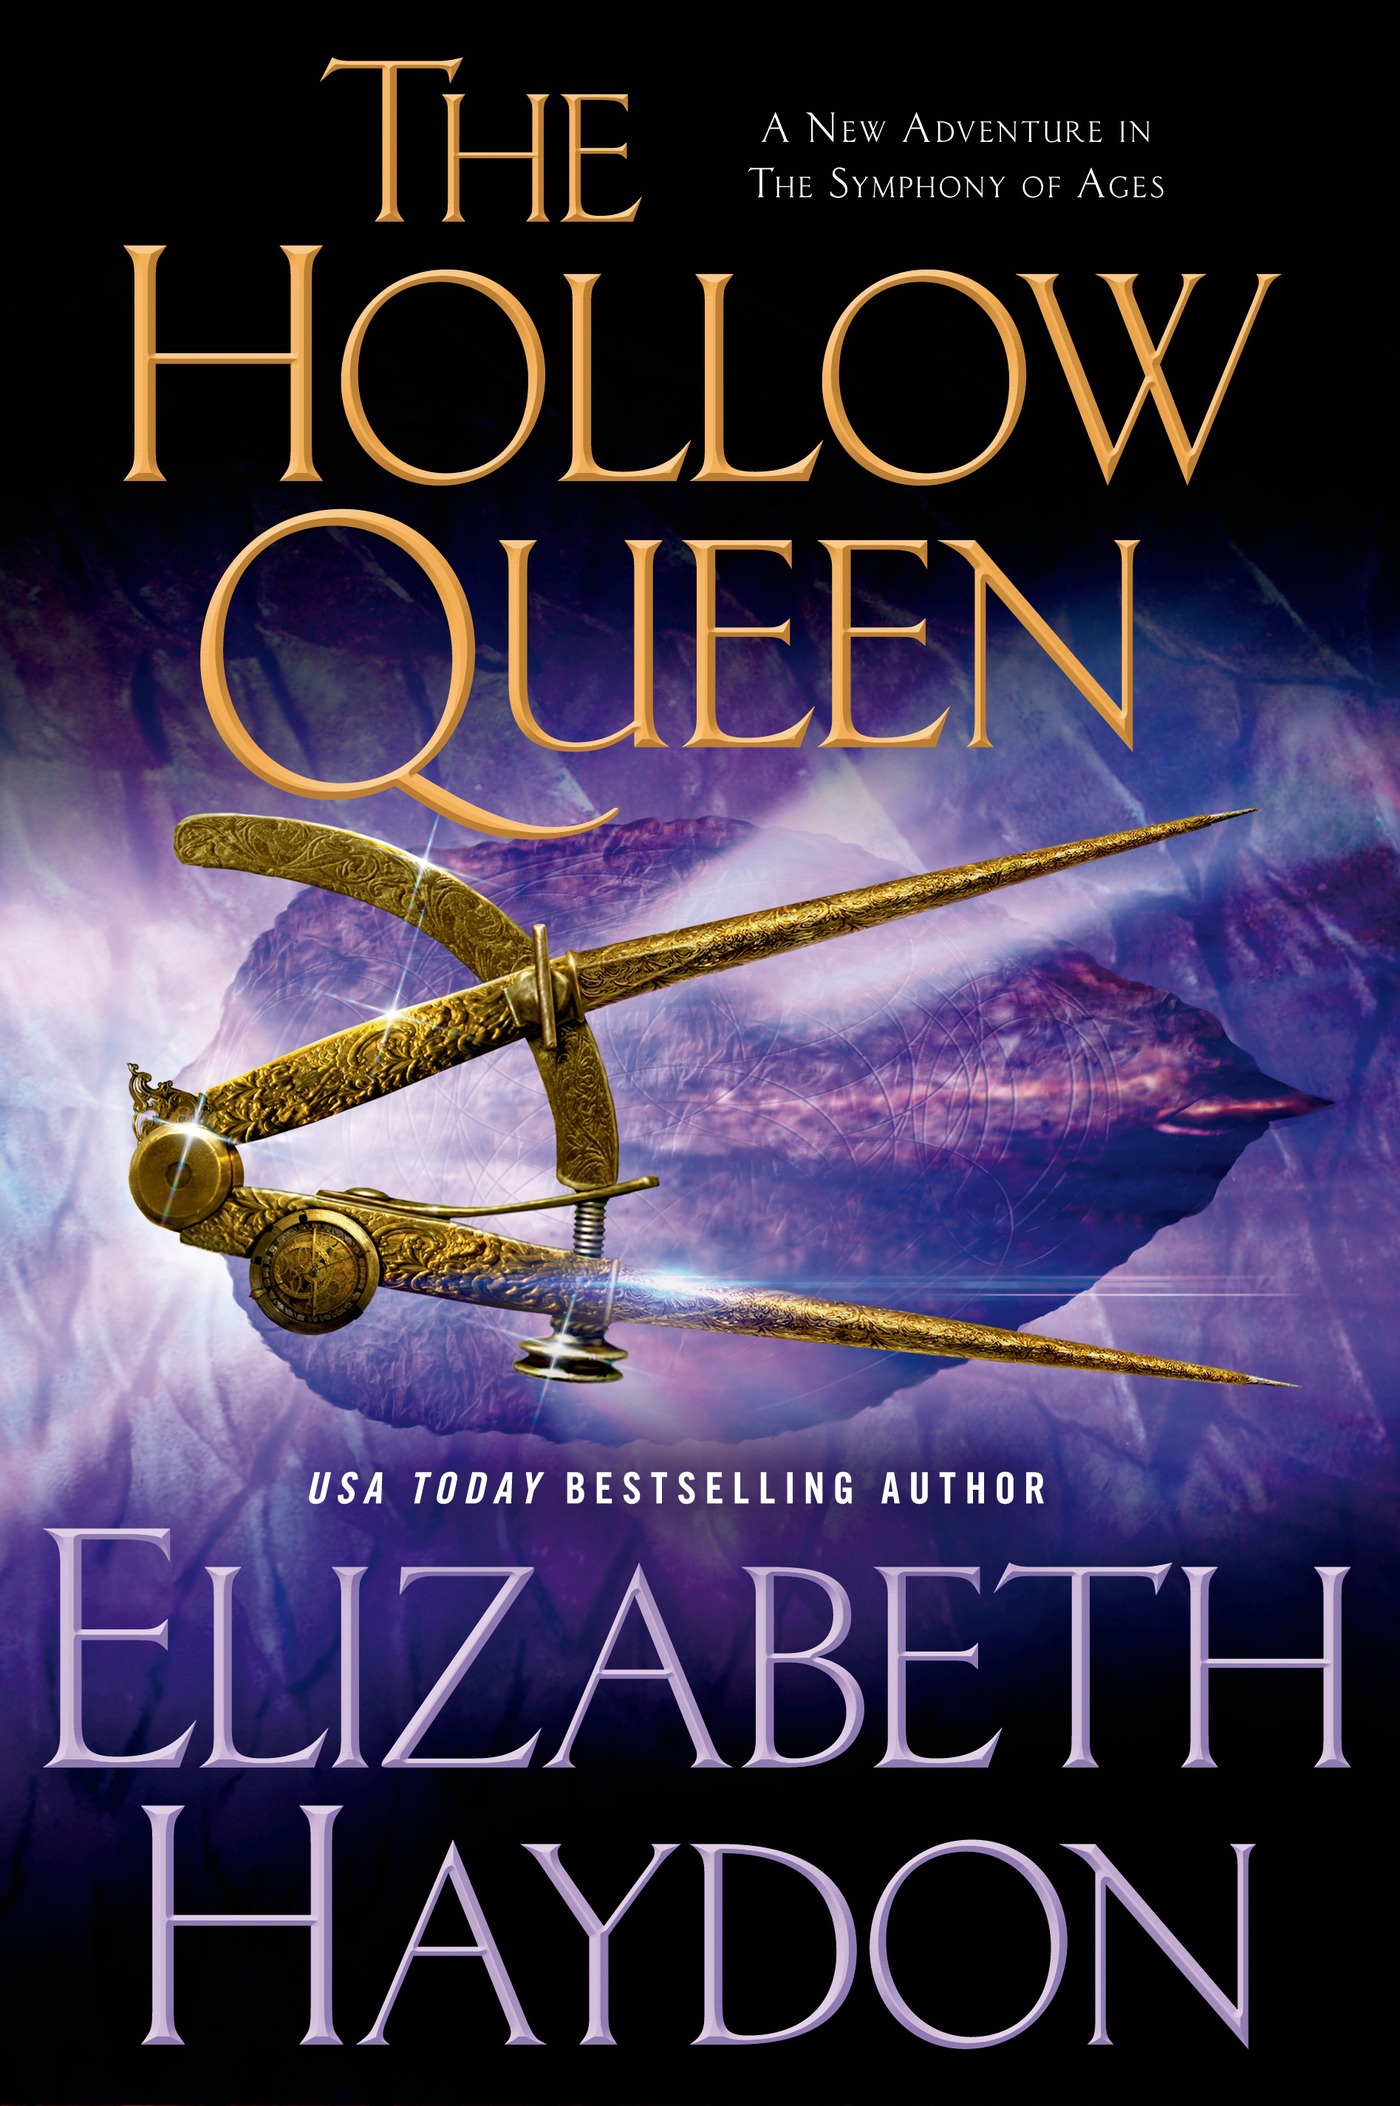 The Hollow Queen : The Symphony of Ages by Elizabeth Haydon